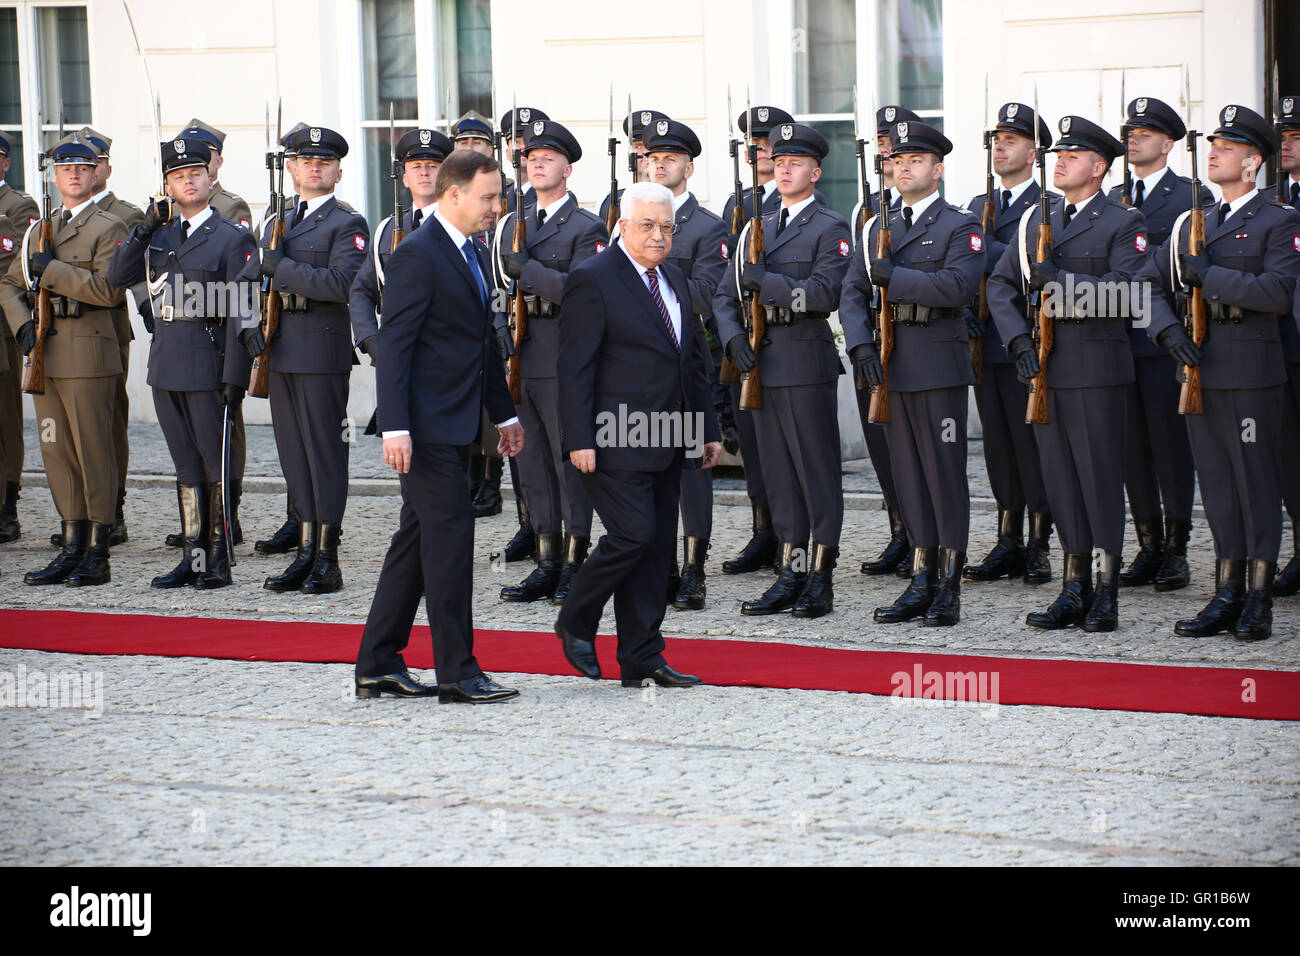 Poland, Warsaw, 6th September 2016: President Andrzej Duda received Palestinian President Mahmoud Abbas with military honours for official visit. Credit: Jake Ratz/Alamy Live News Stock Photo